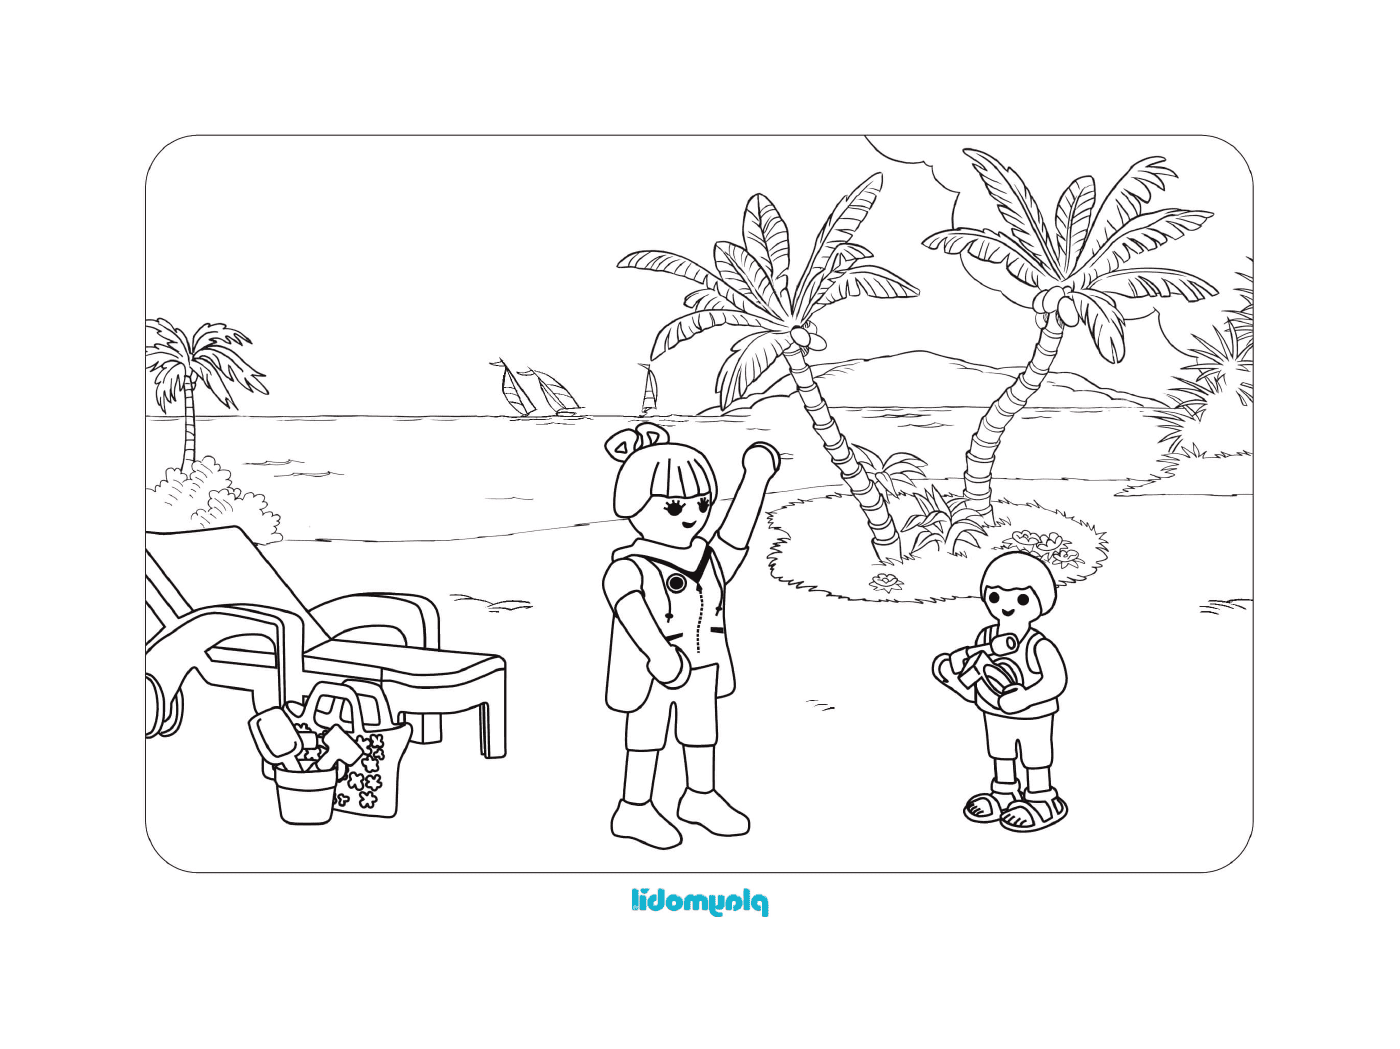  Child and person on vacation 